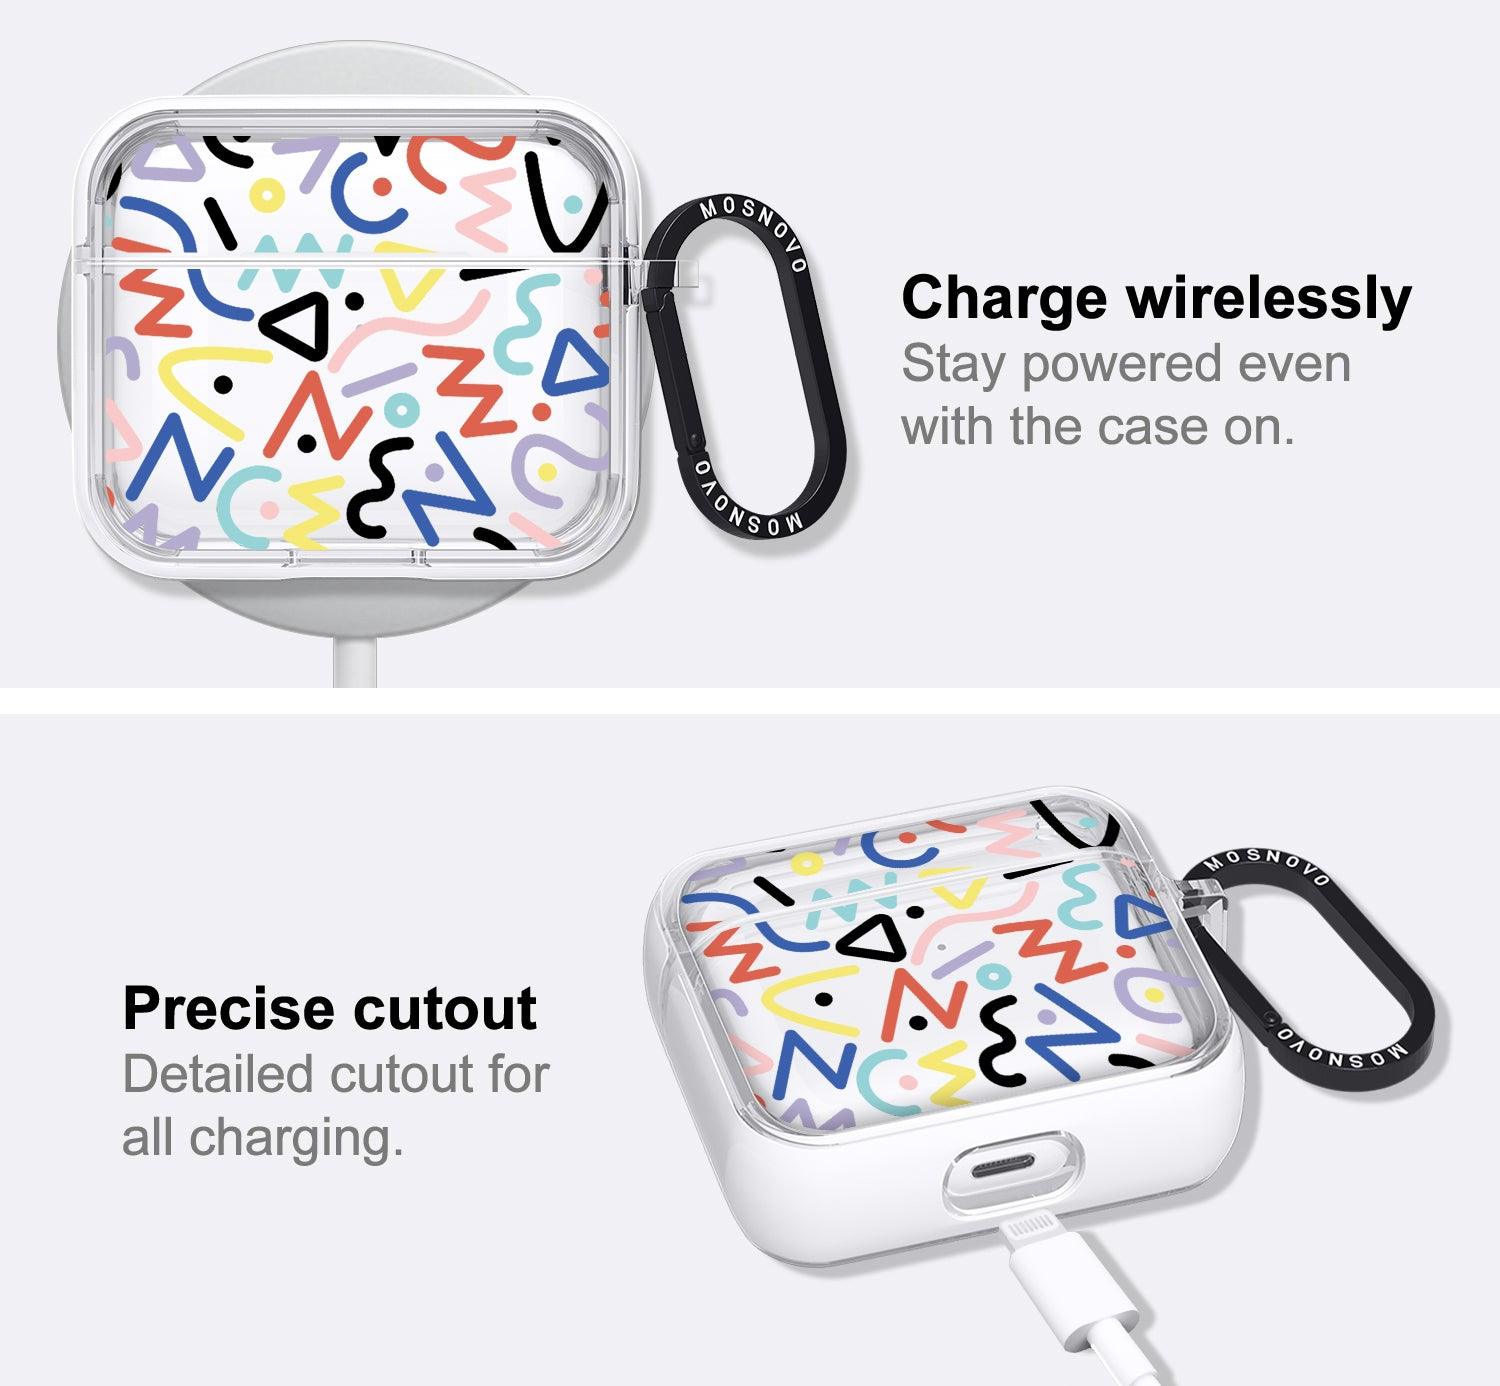 Doodle Art AirPods 3 Case (3rd Generation) - MOSNOVO